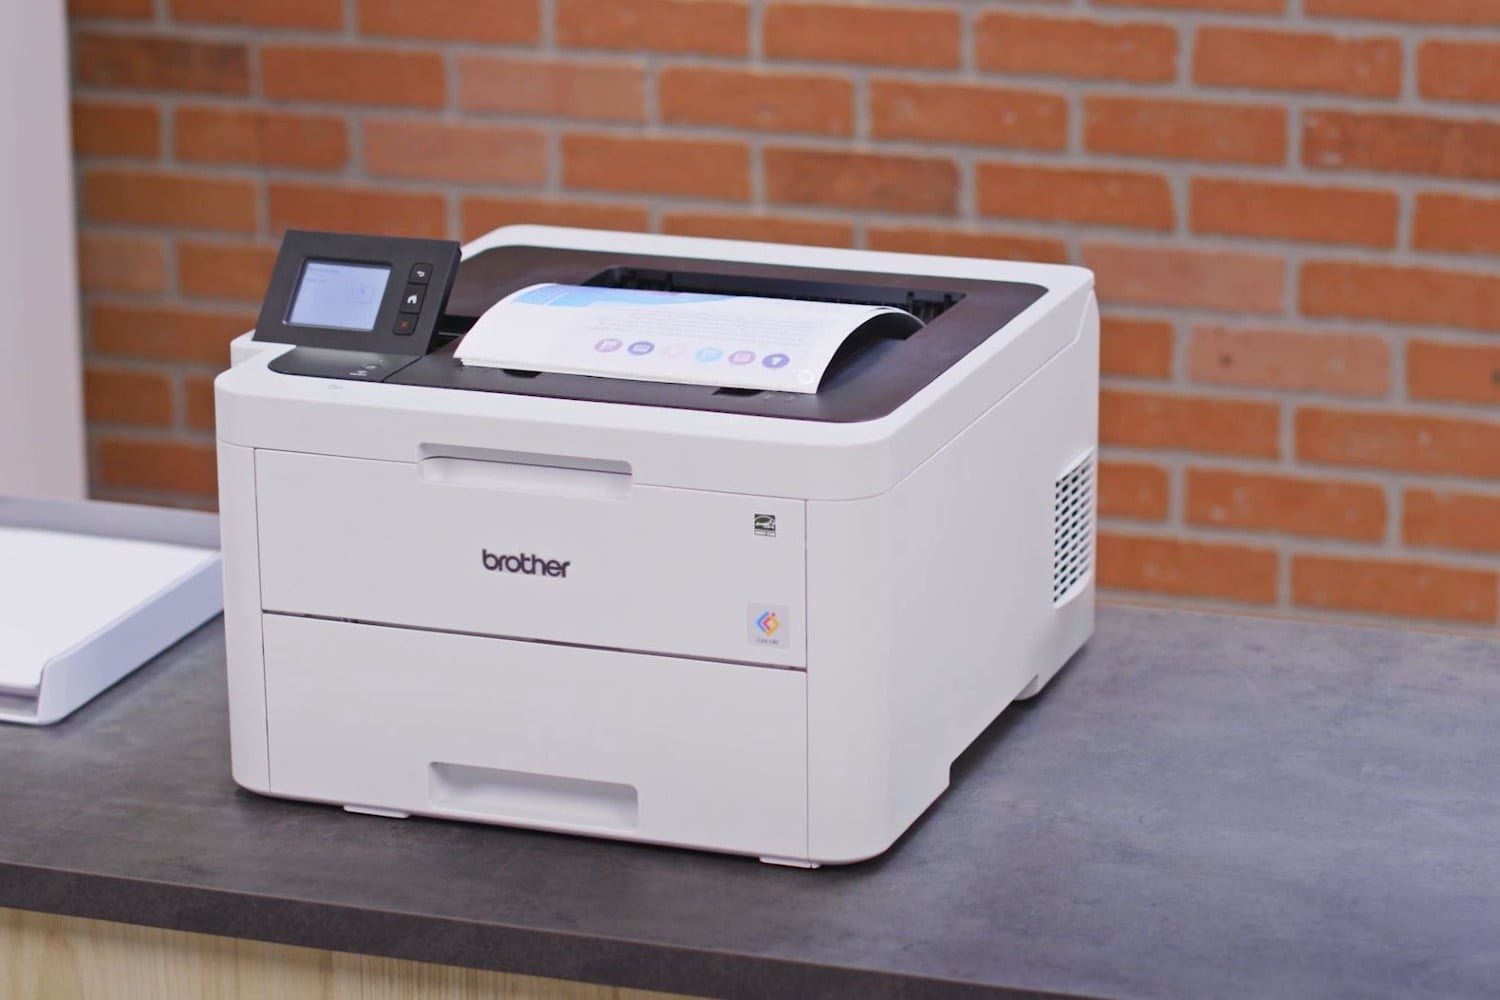 best laser printer for mac home use